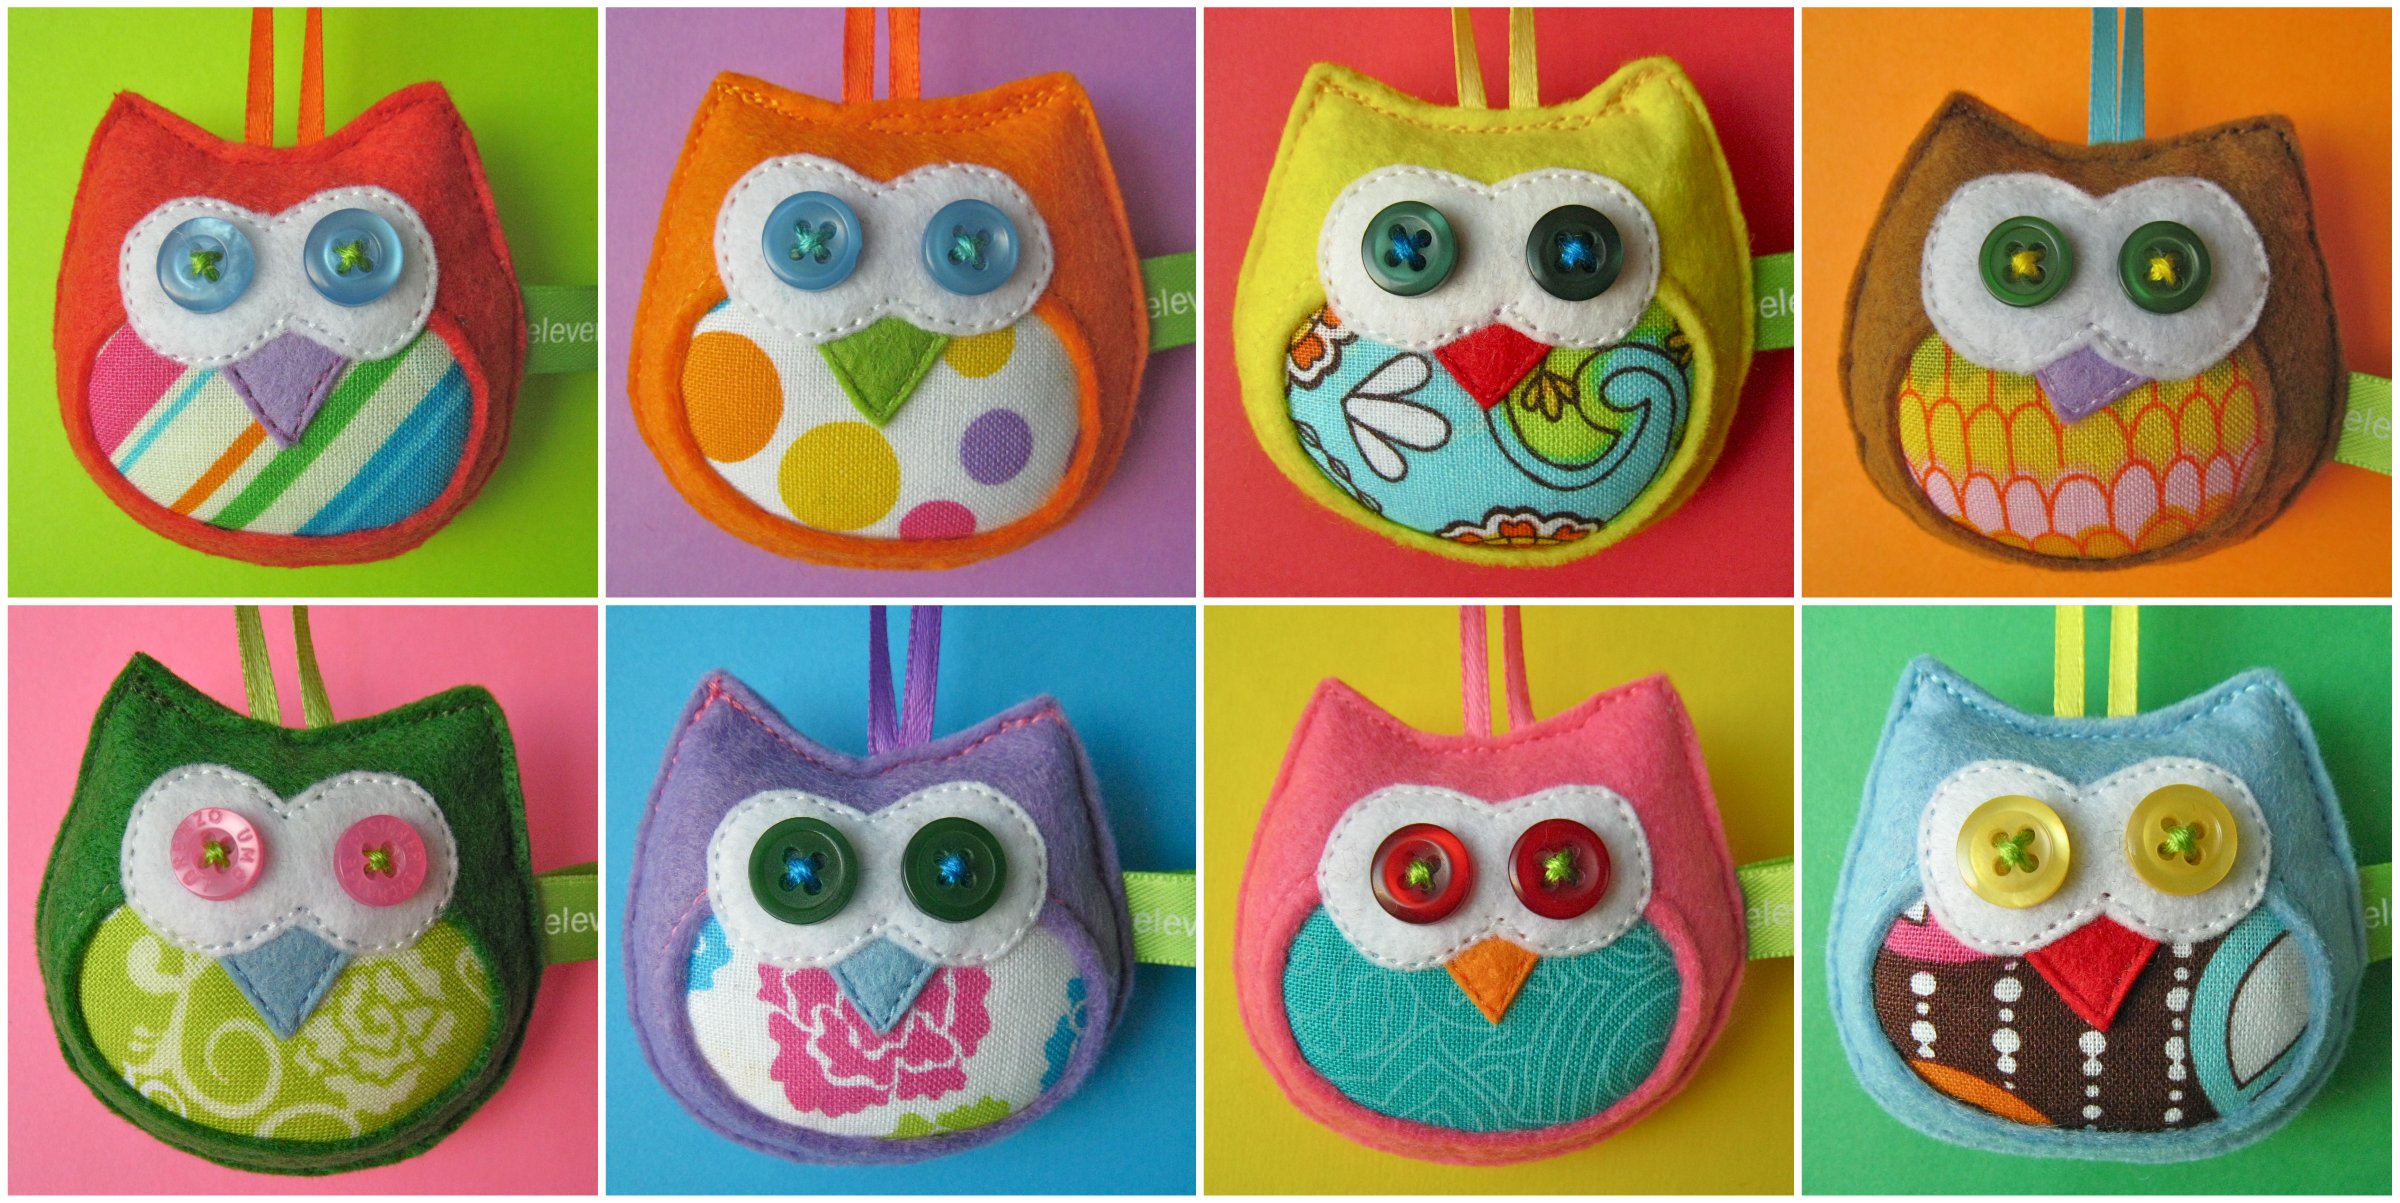 The tiny colored owls